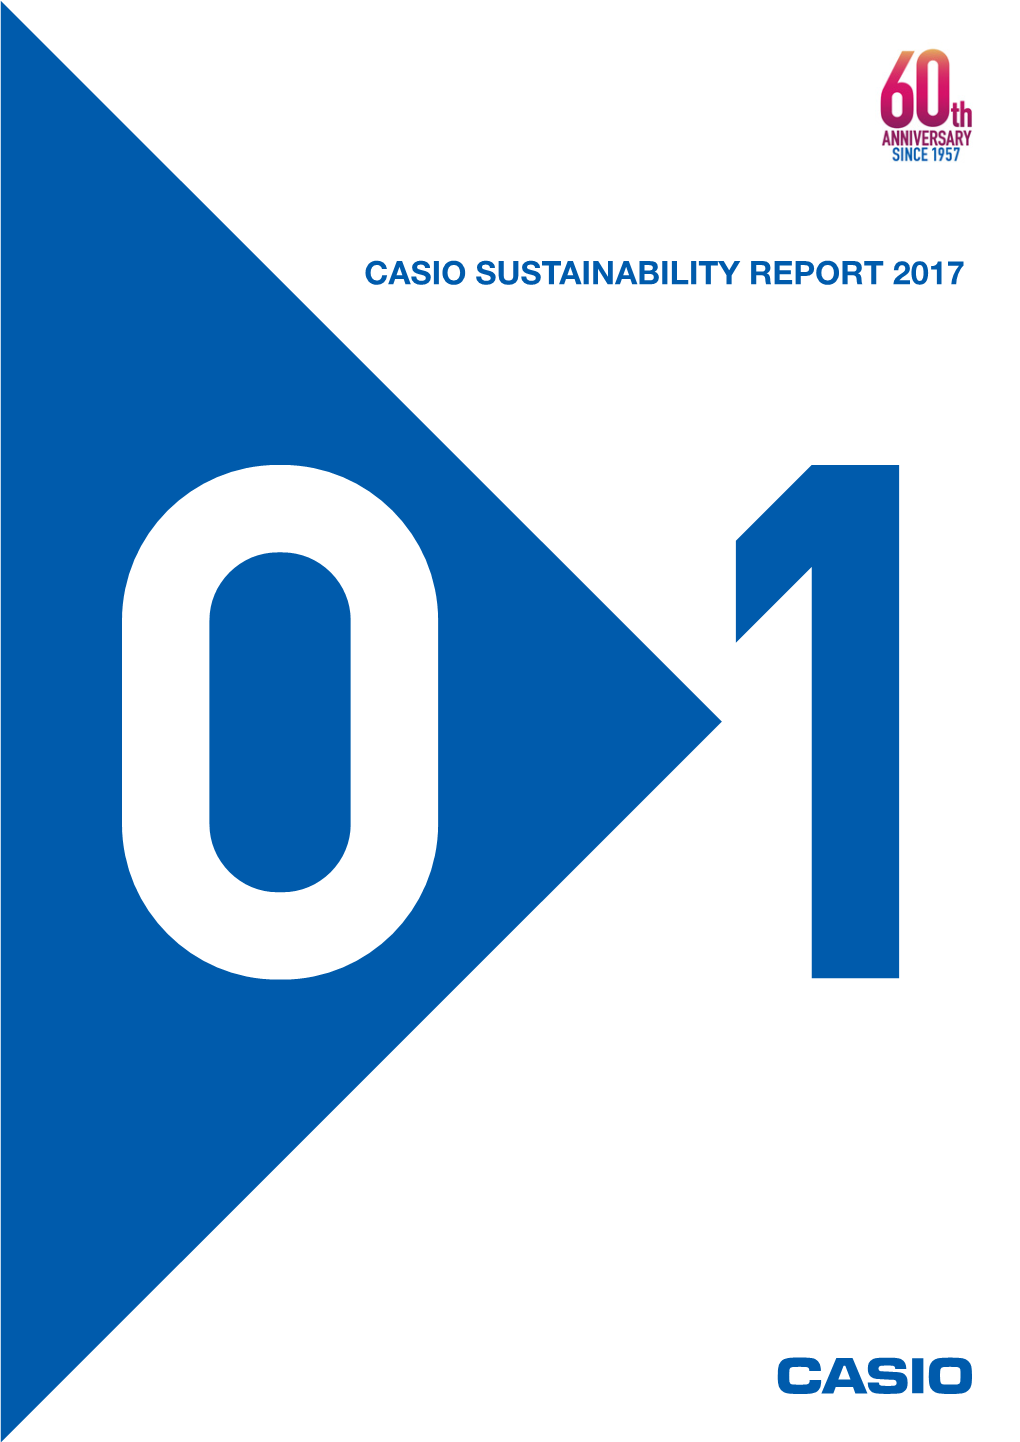 CASIO SUSTAINABILITY REPORT 2017 Contents Contents